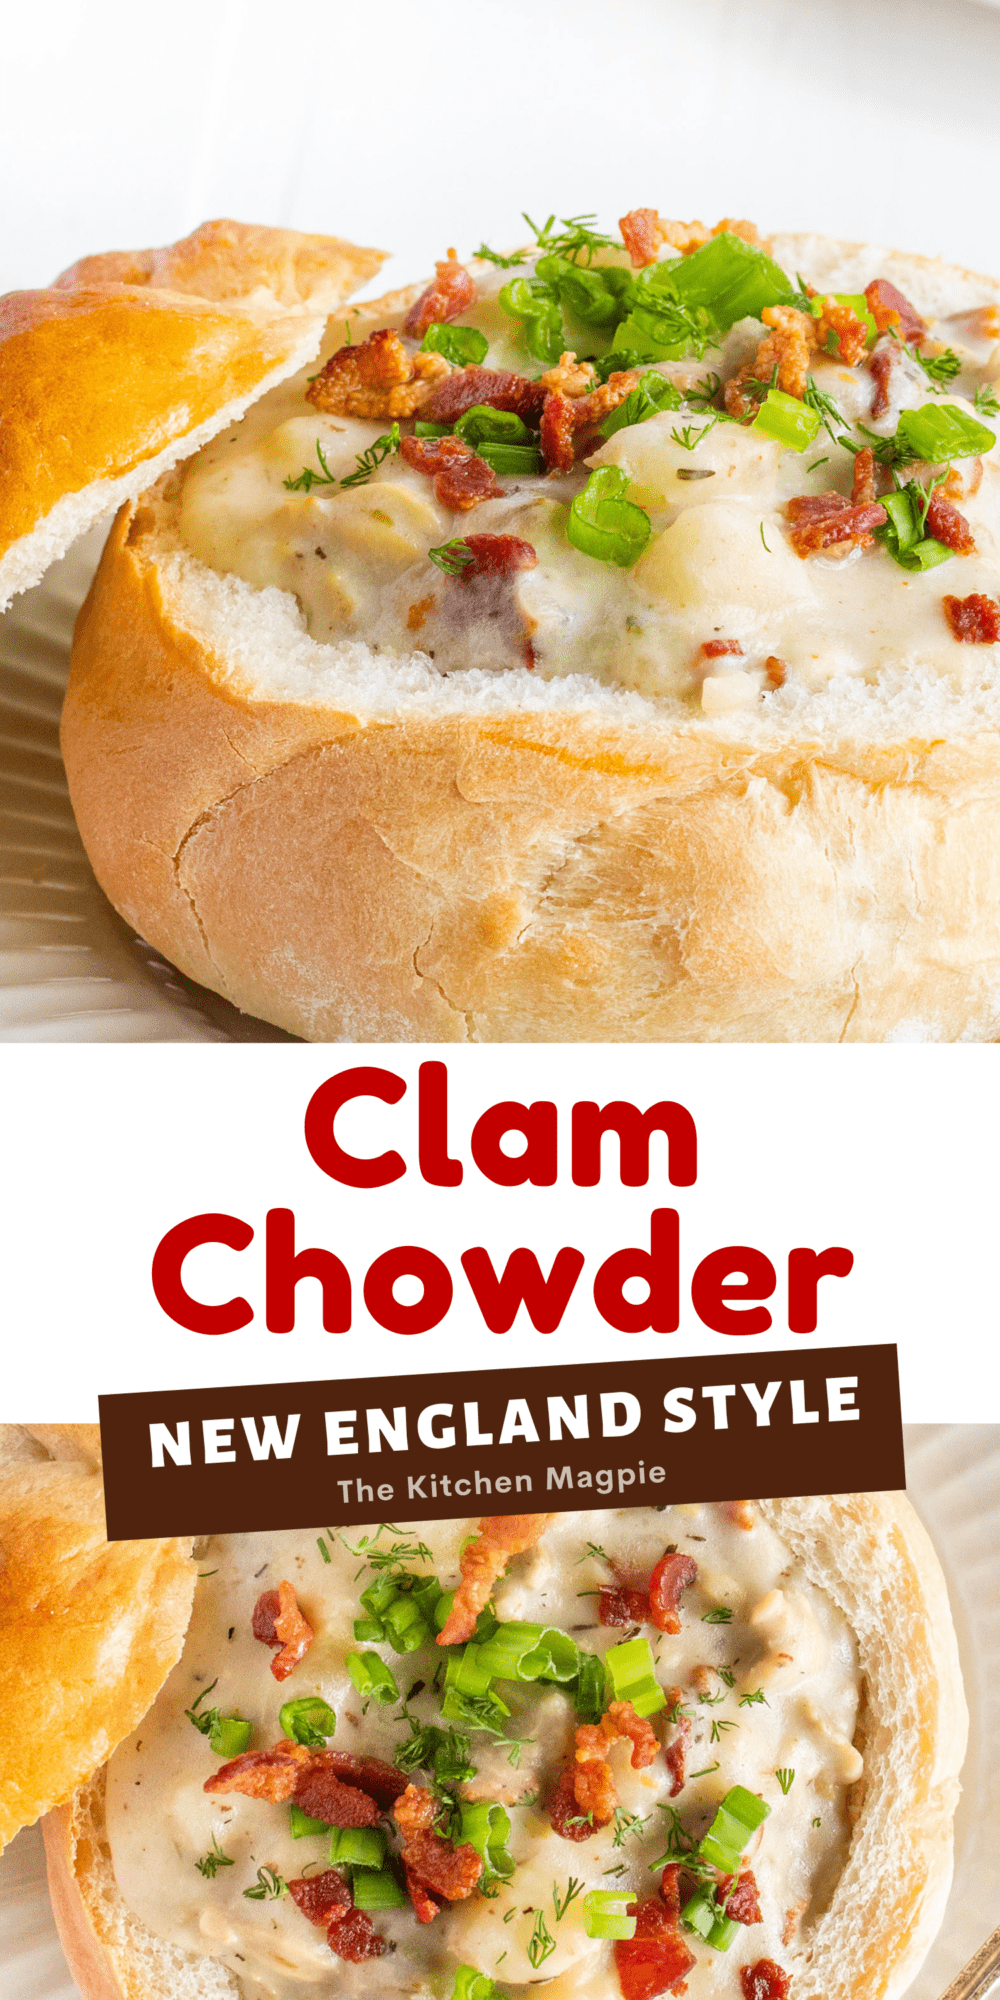 This deliciously thick and rich New England clam chowder is loaded with minced and whole baby clams, potatoes and more, in a decadent creamy broth.